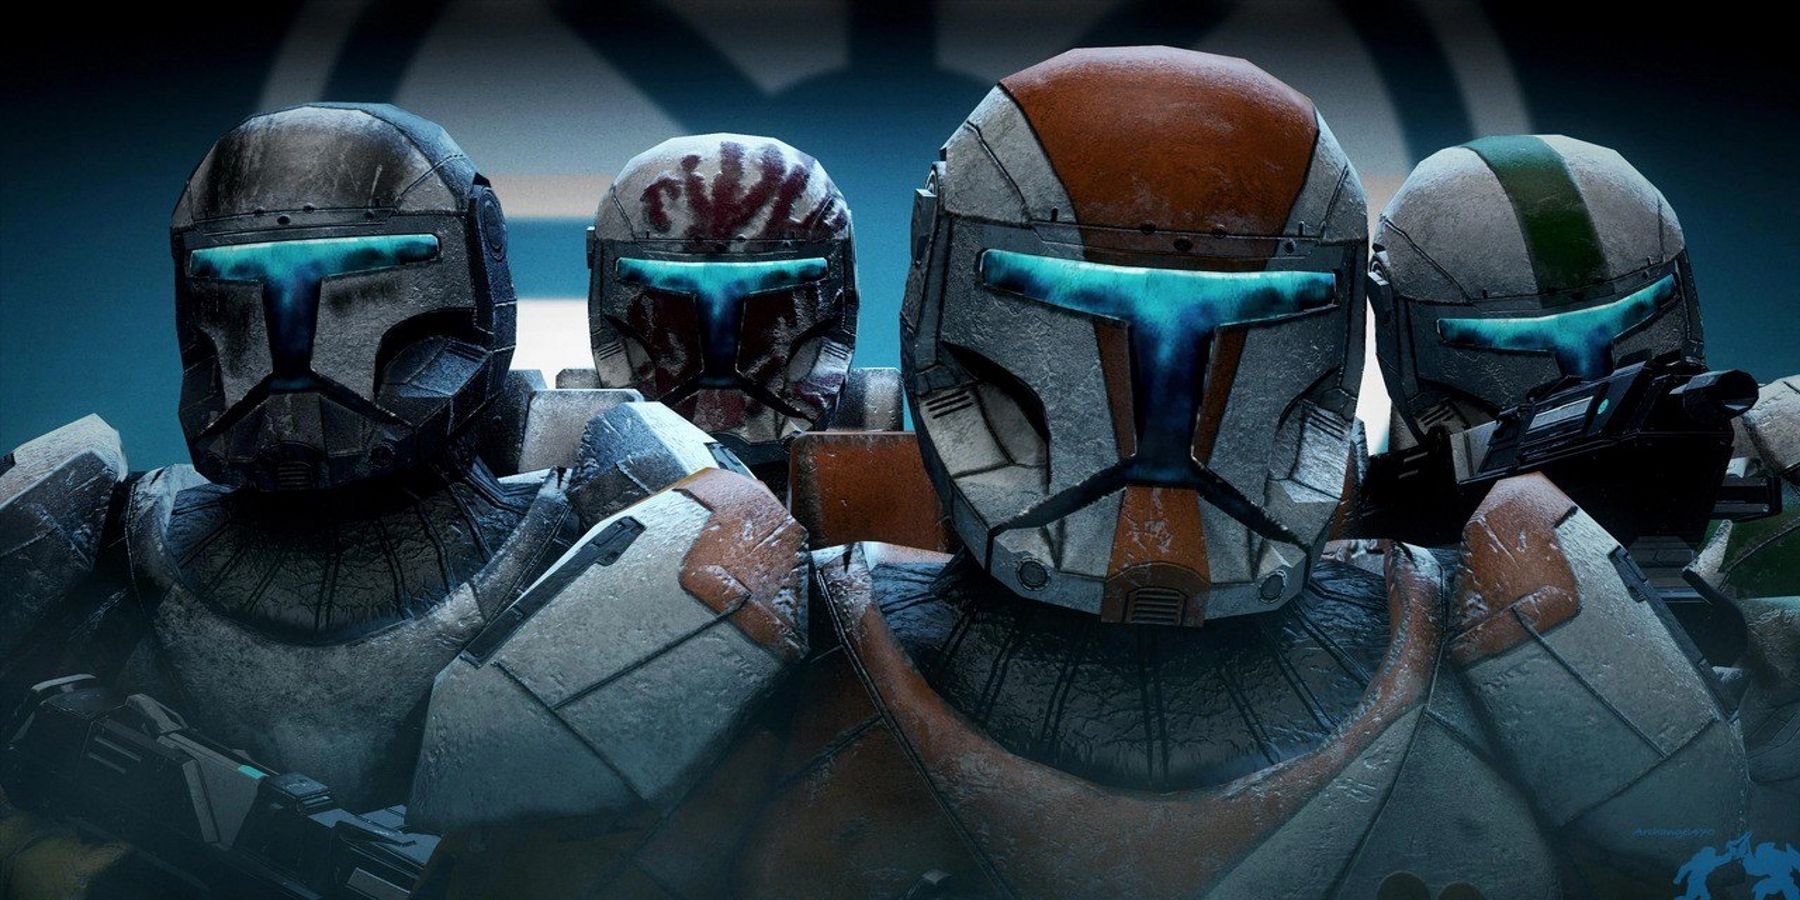 Star Wars: Republic Commando Differences From Other Star Wars Games